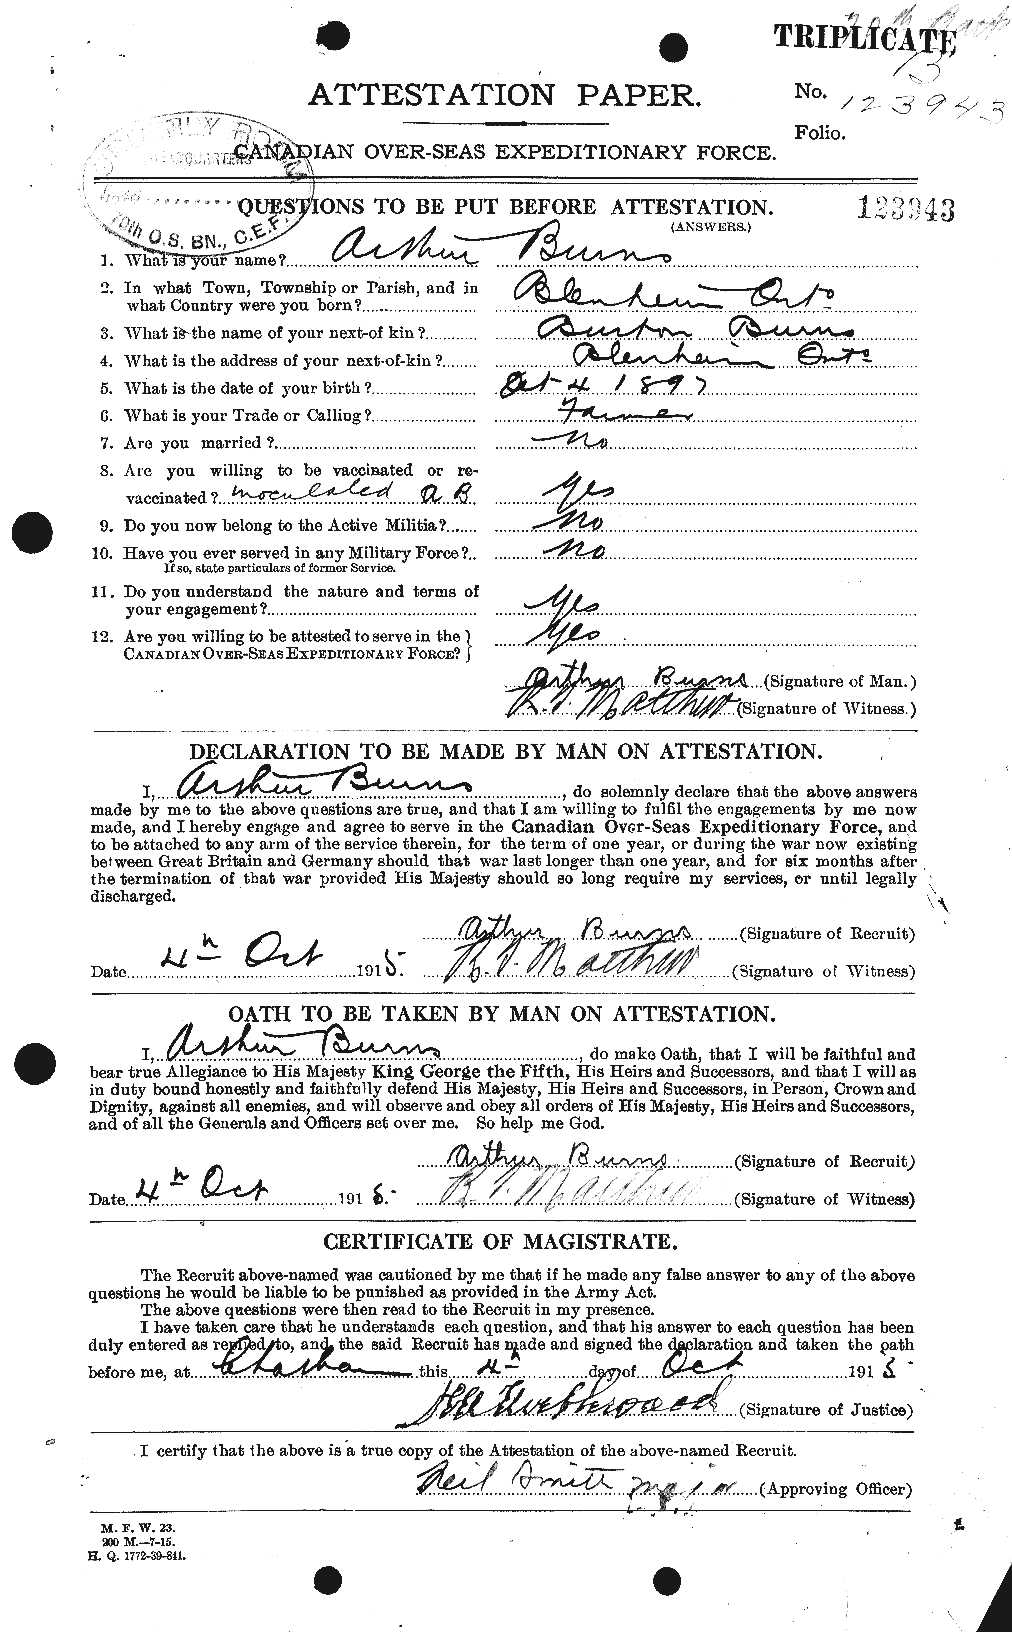 Personnel Records of the First World War - CEF 273781a